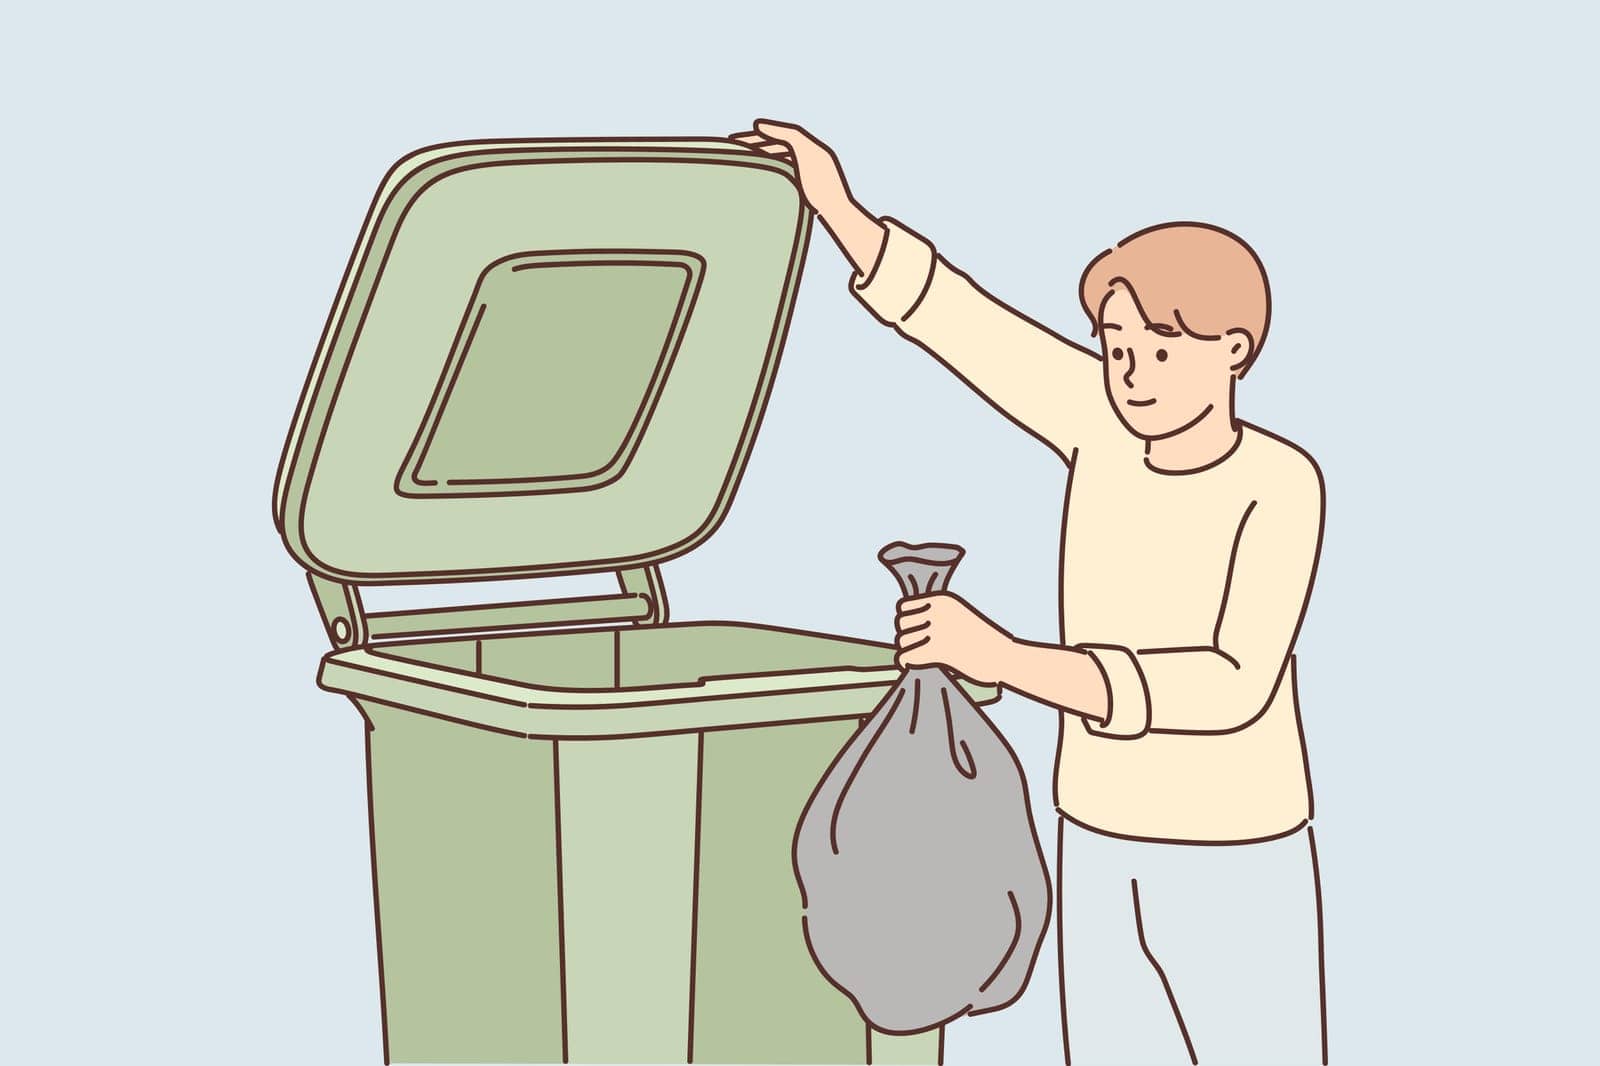 Man throws garbage into large container for concept of overabundance of garbage on planet. Guy stands near trash can and holds black bag refusing to sort waste and take care of environment